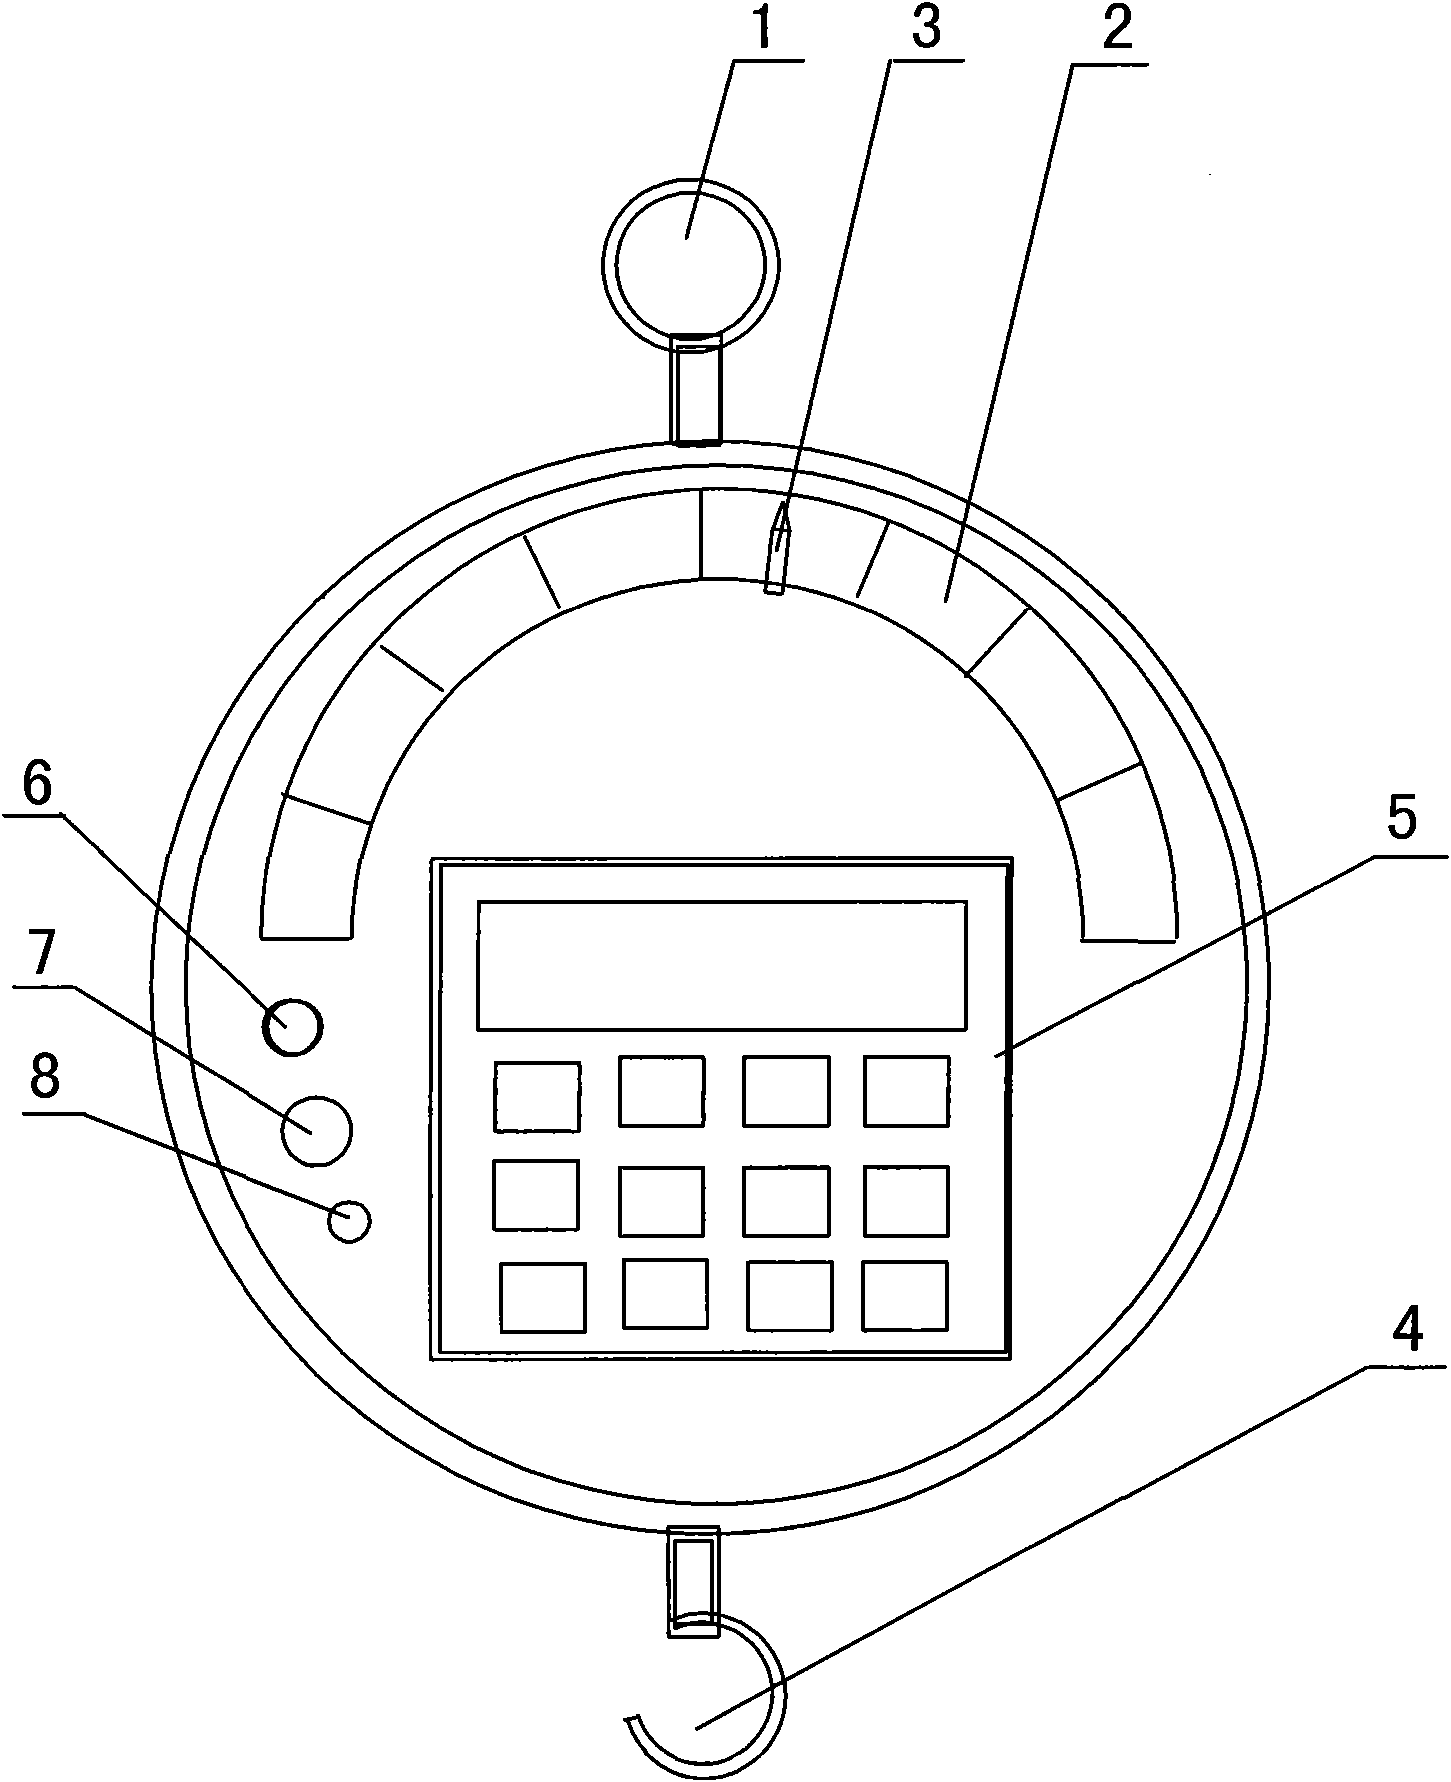 Spring scale with currency detector and counter